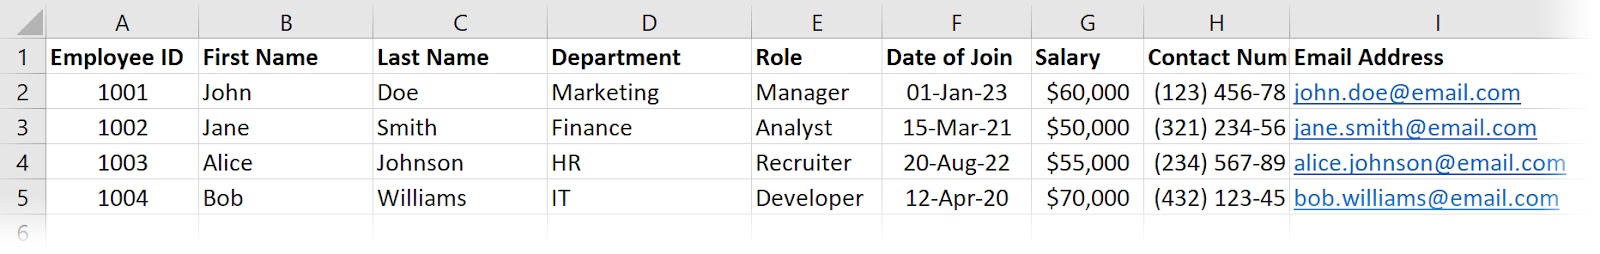 A Microsoft Excel spreadsheet used to track employee contact details